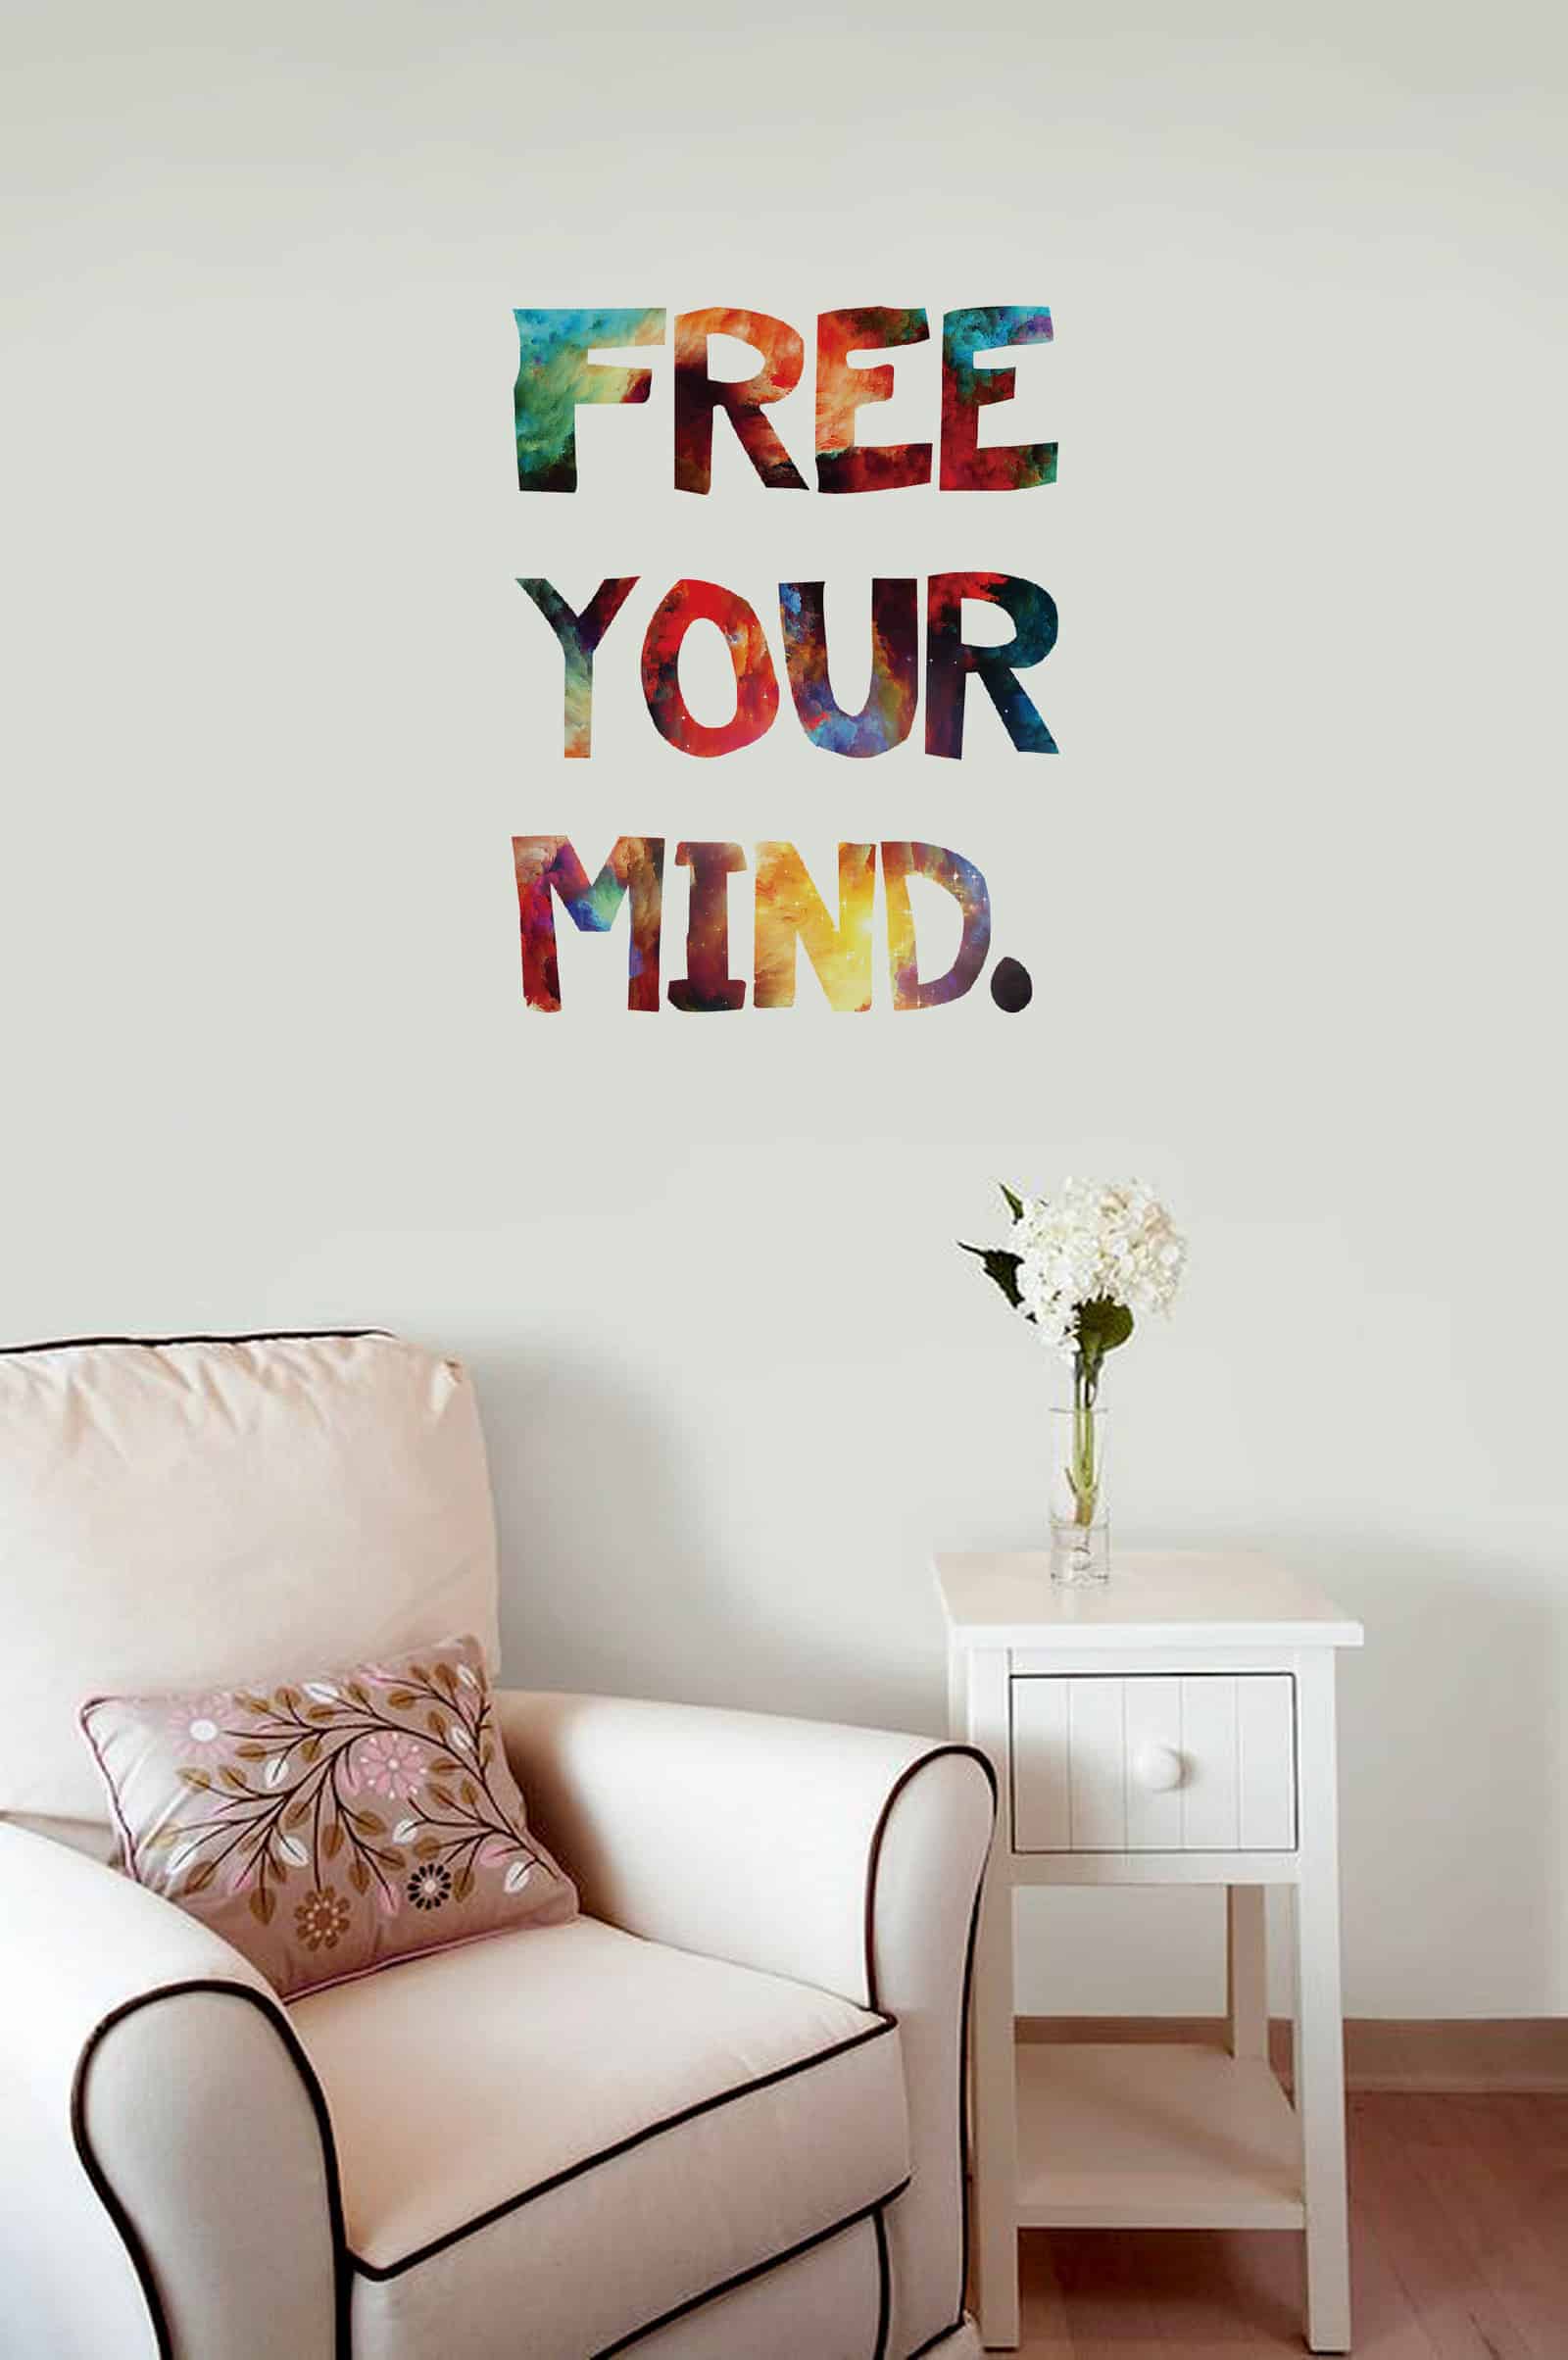 Free your mind Wall Sticker